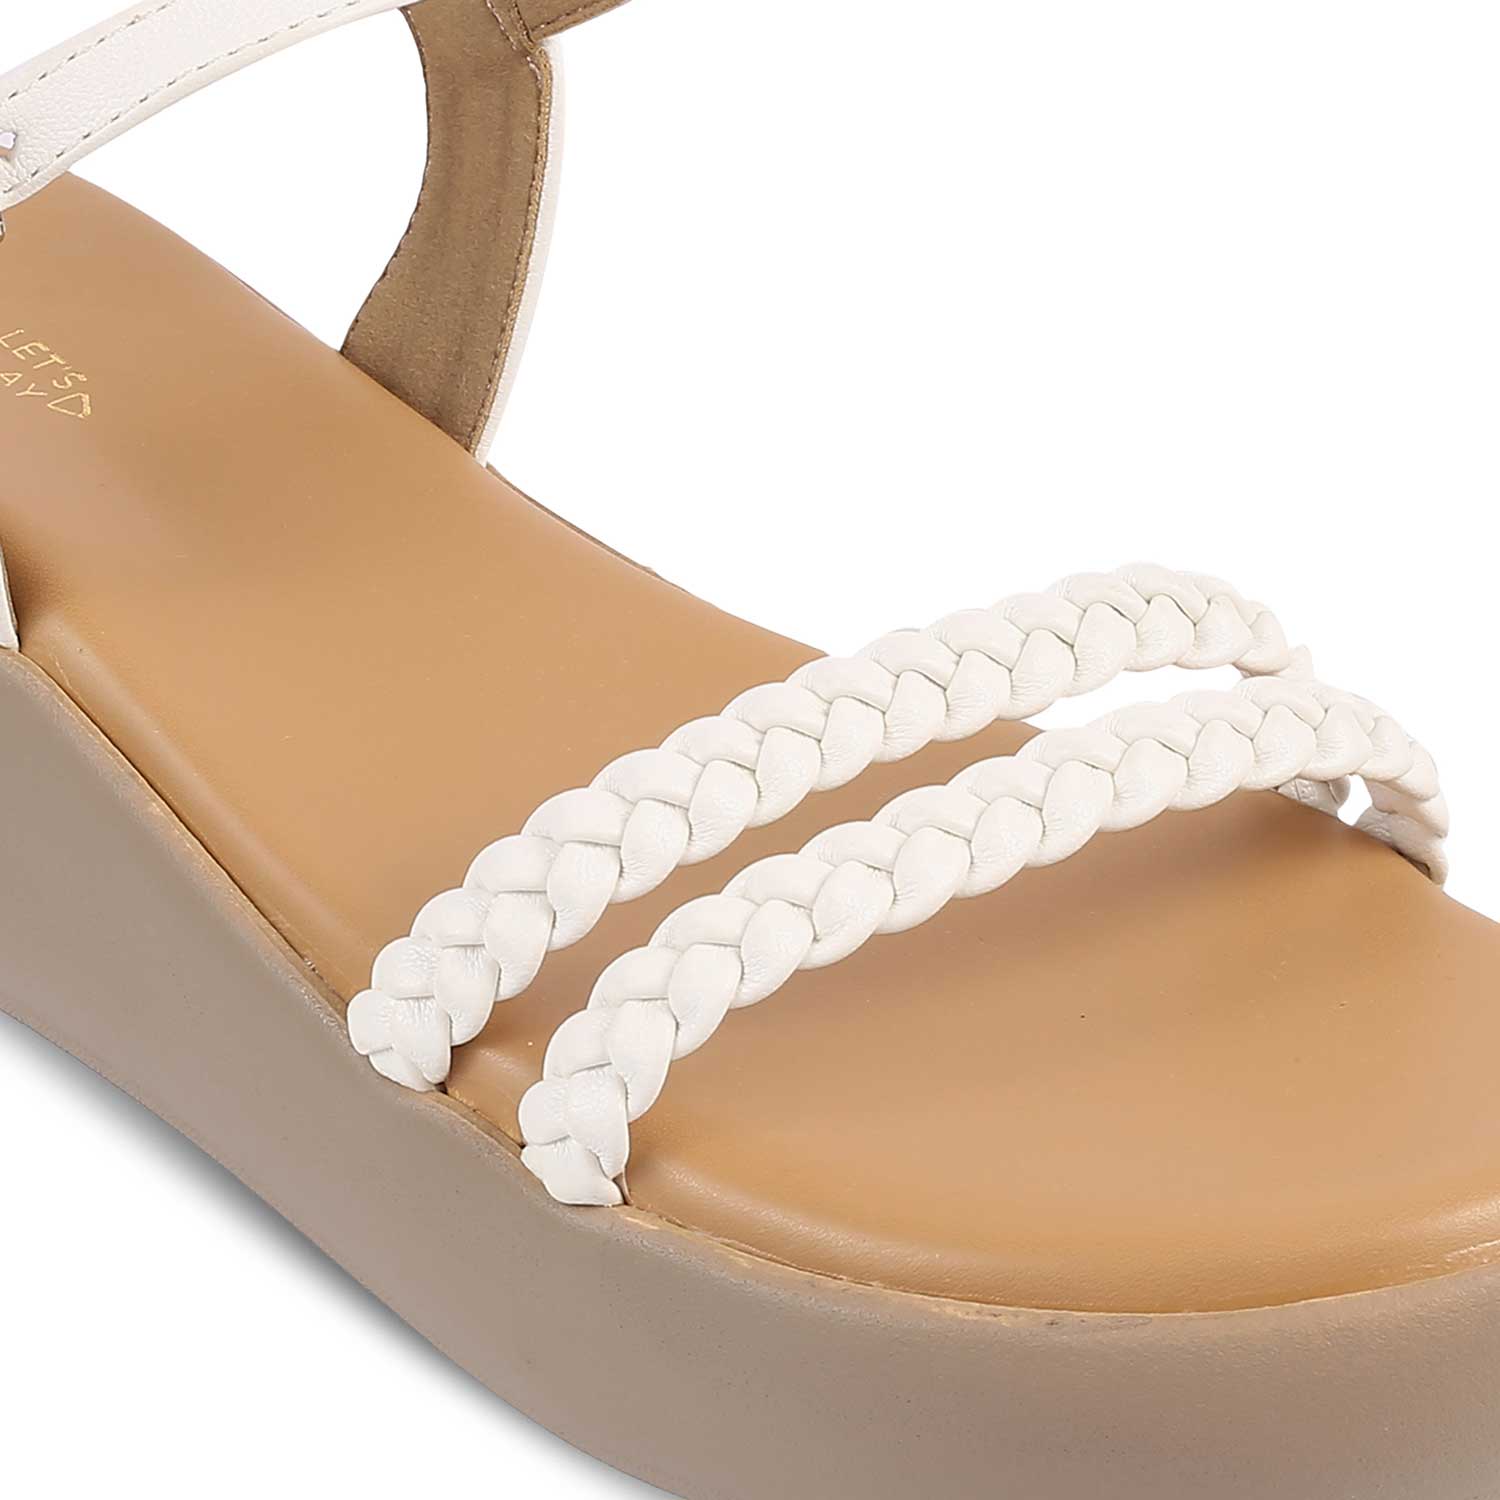 The Seev White Women's Dress Wedge Sandals Tresmode